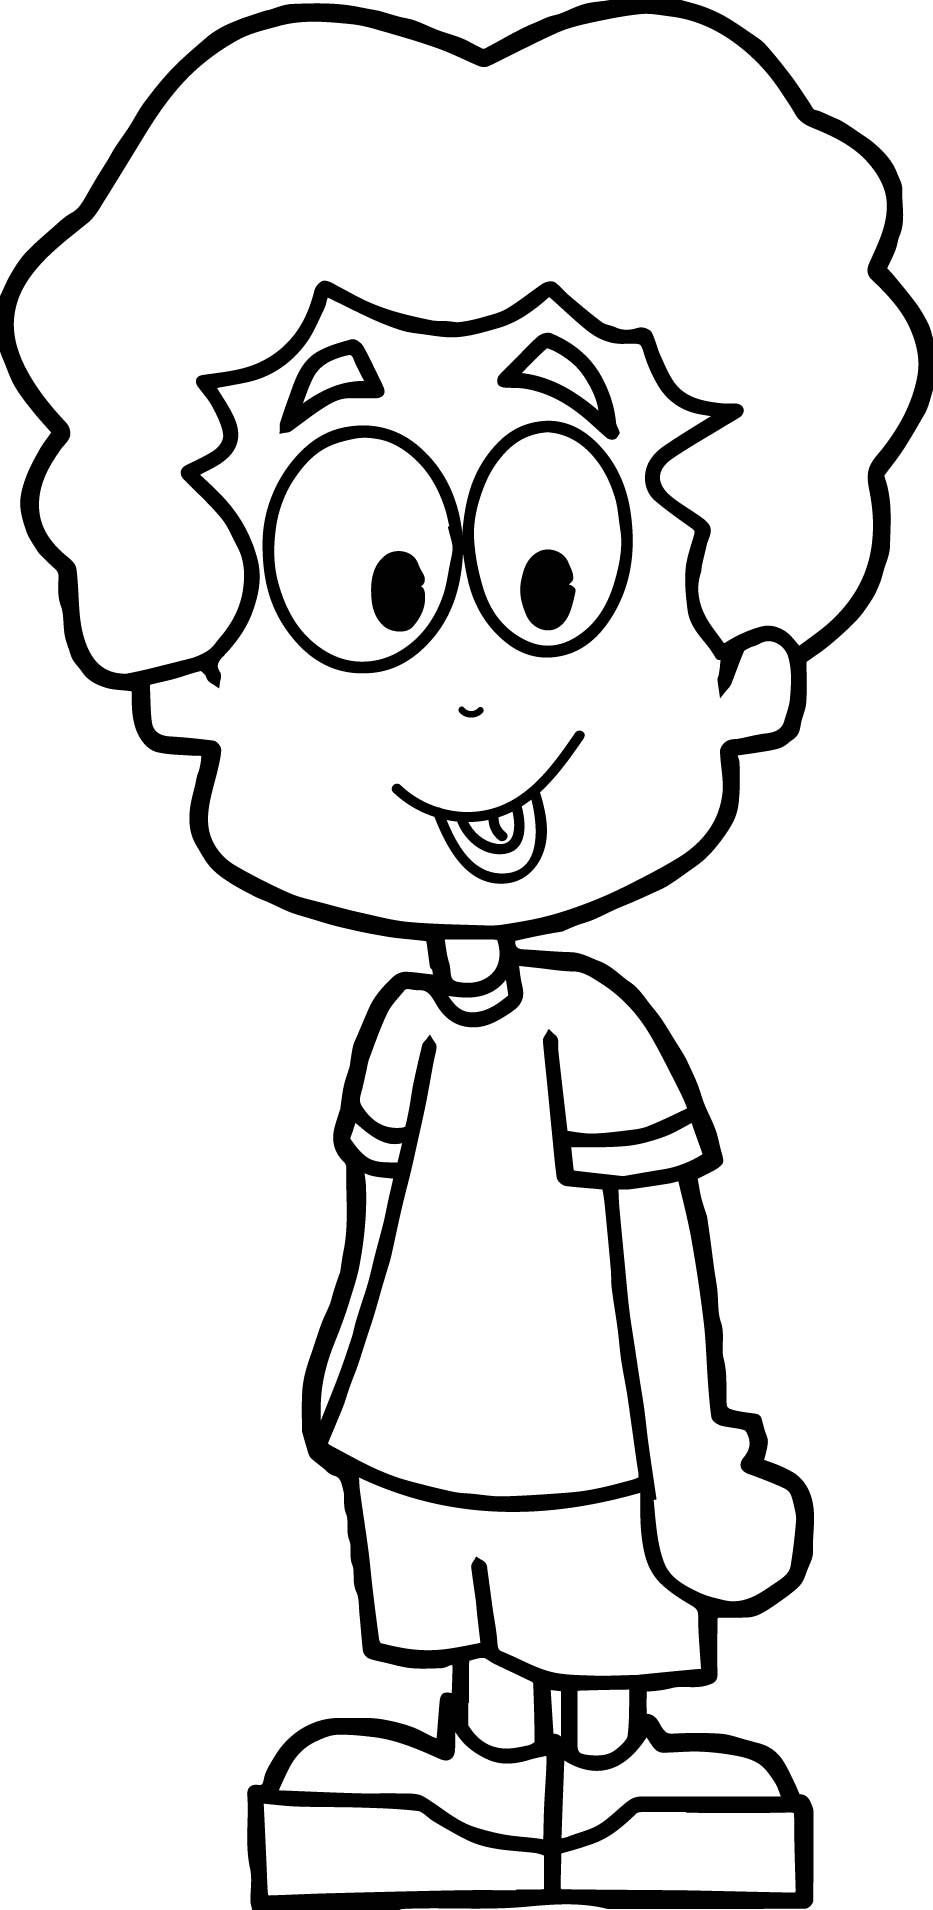 Coloring Book Pages For Boys
 Cartoon Boy Coloring Page